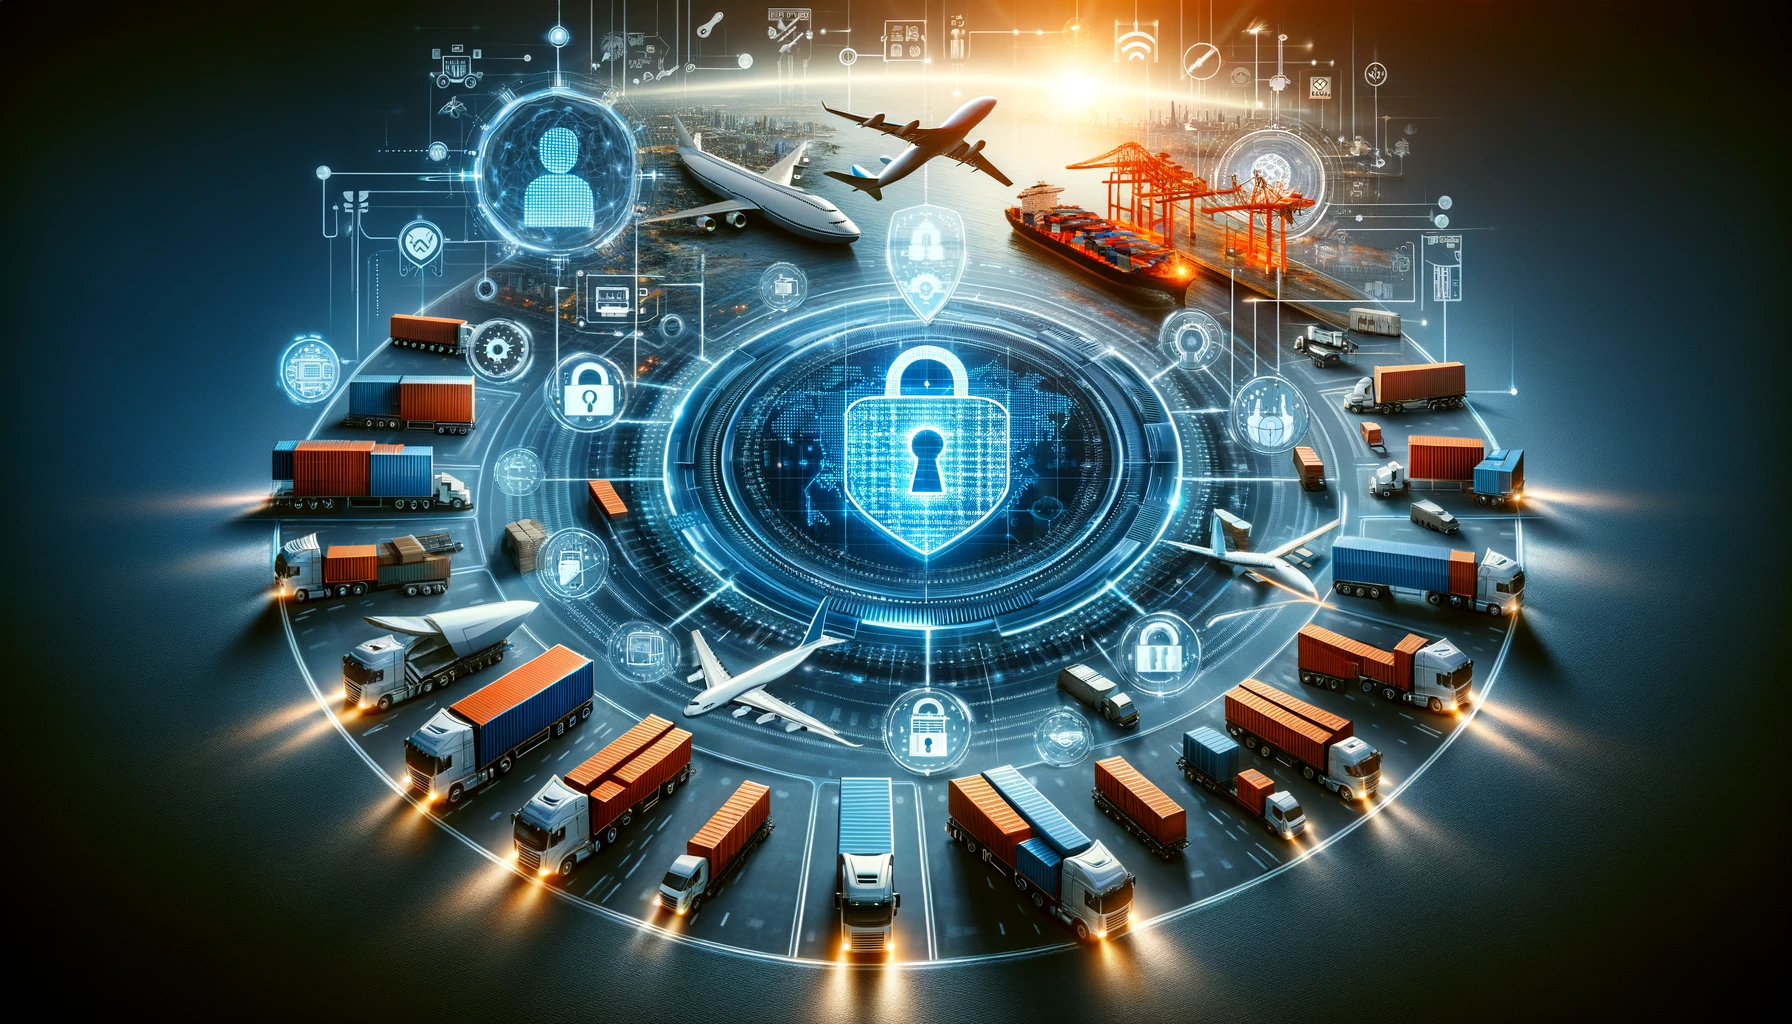 Advanced cybersecurity in logistics concept with digital padlock over cargo containers, trucks, ships, and airplanes